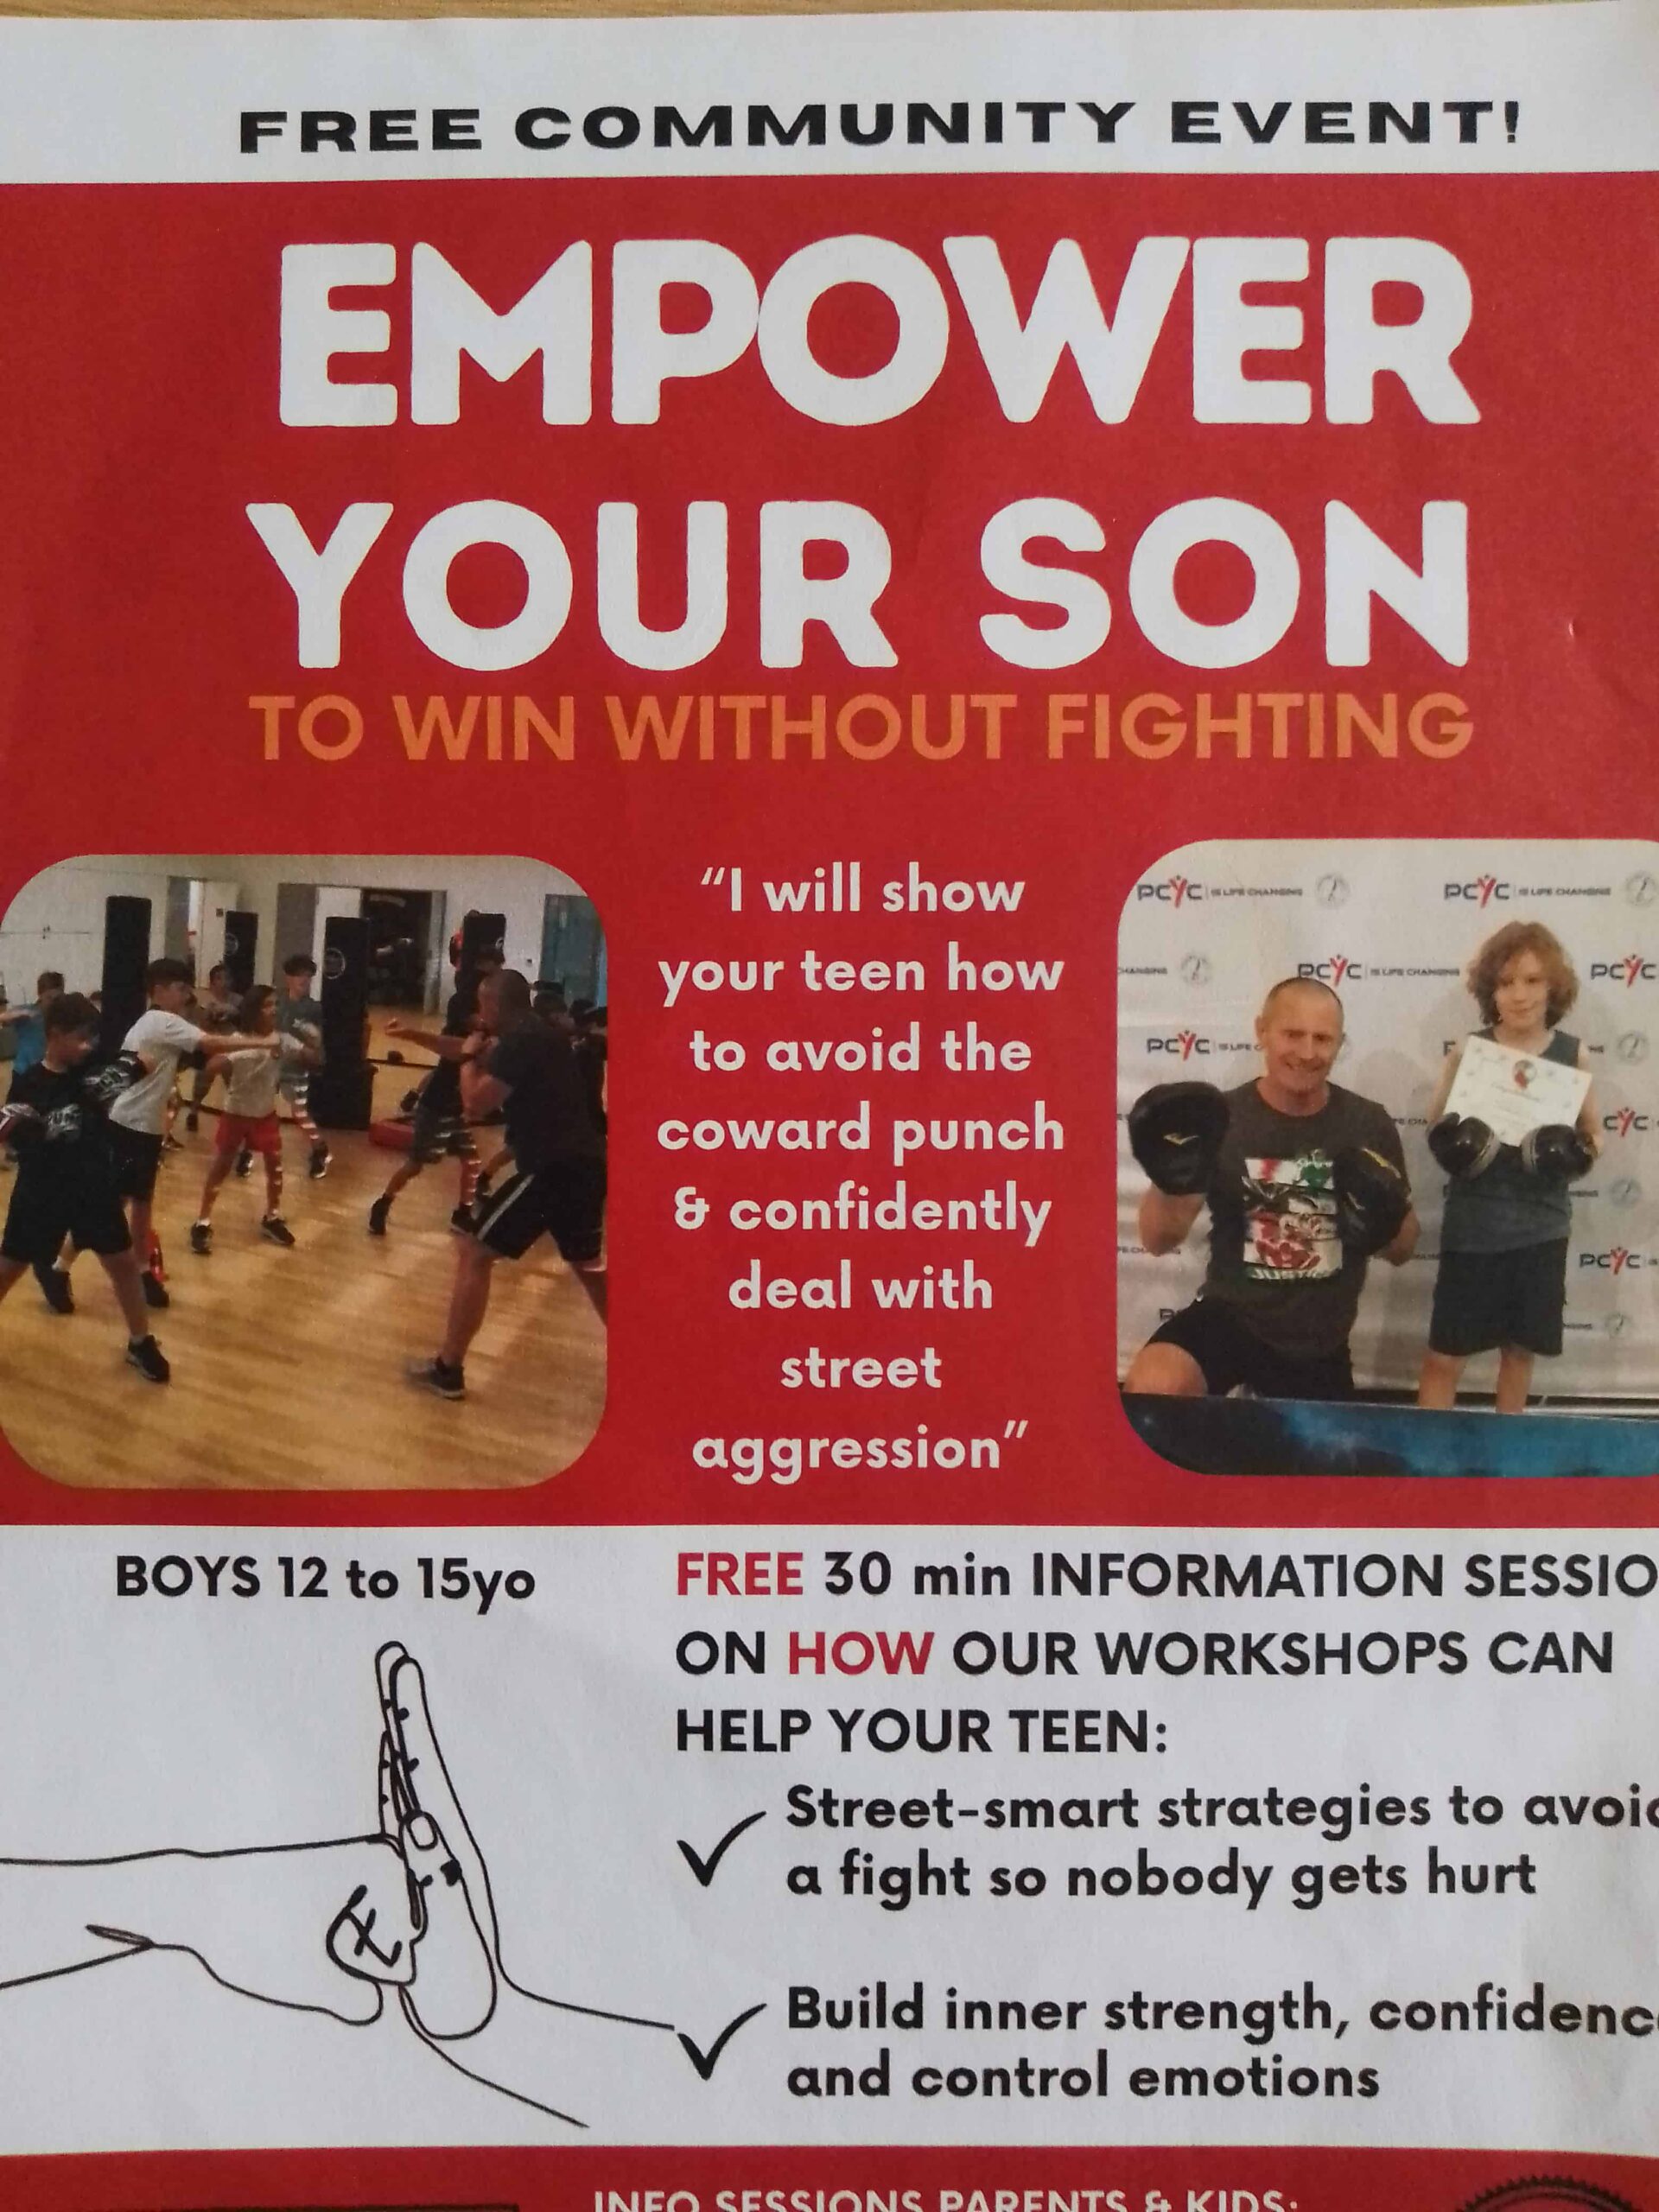 Son Protection! - helping boys avoid violence this Summer Holidays